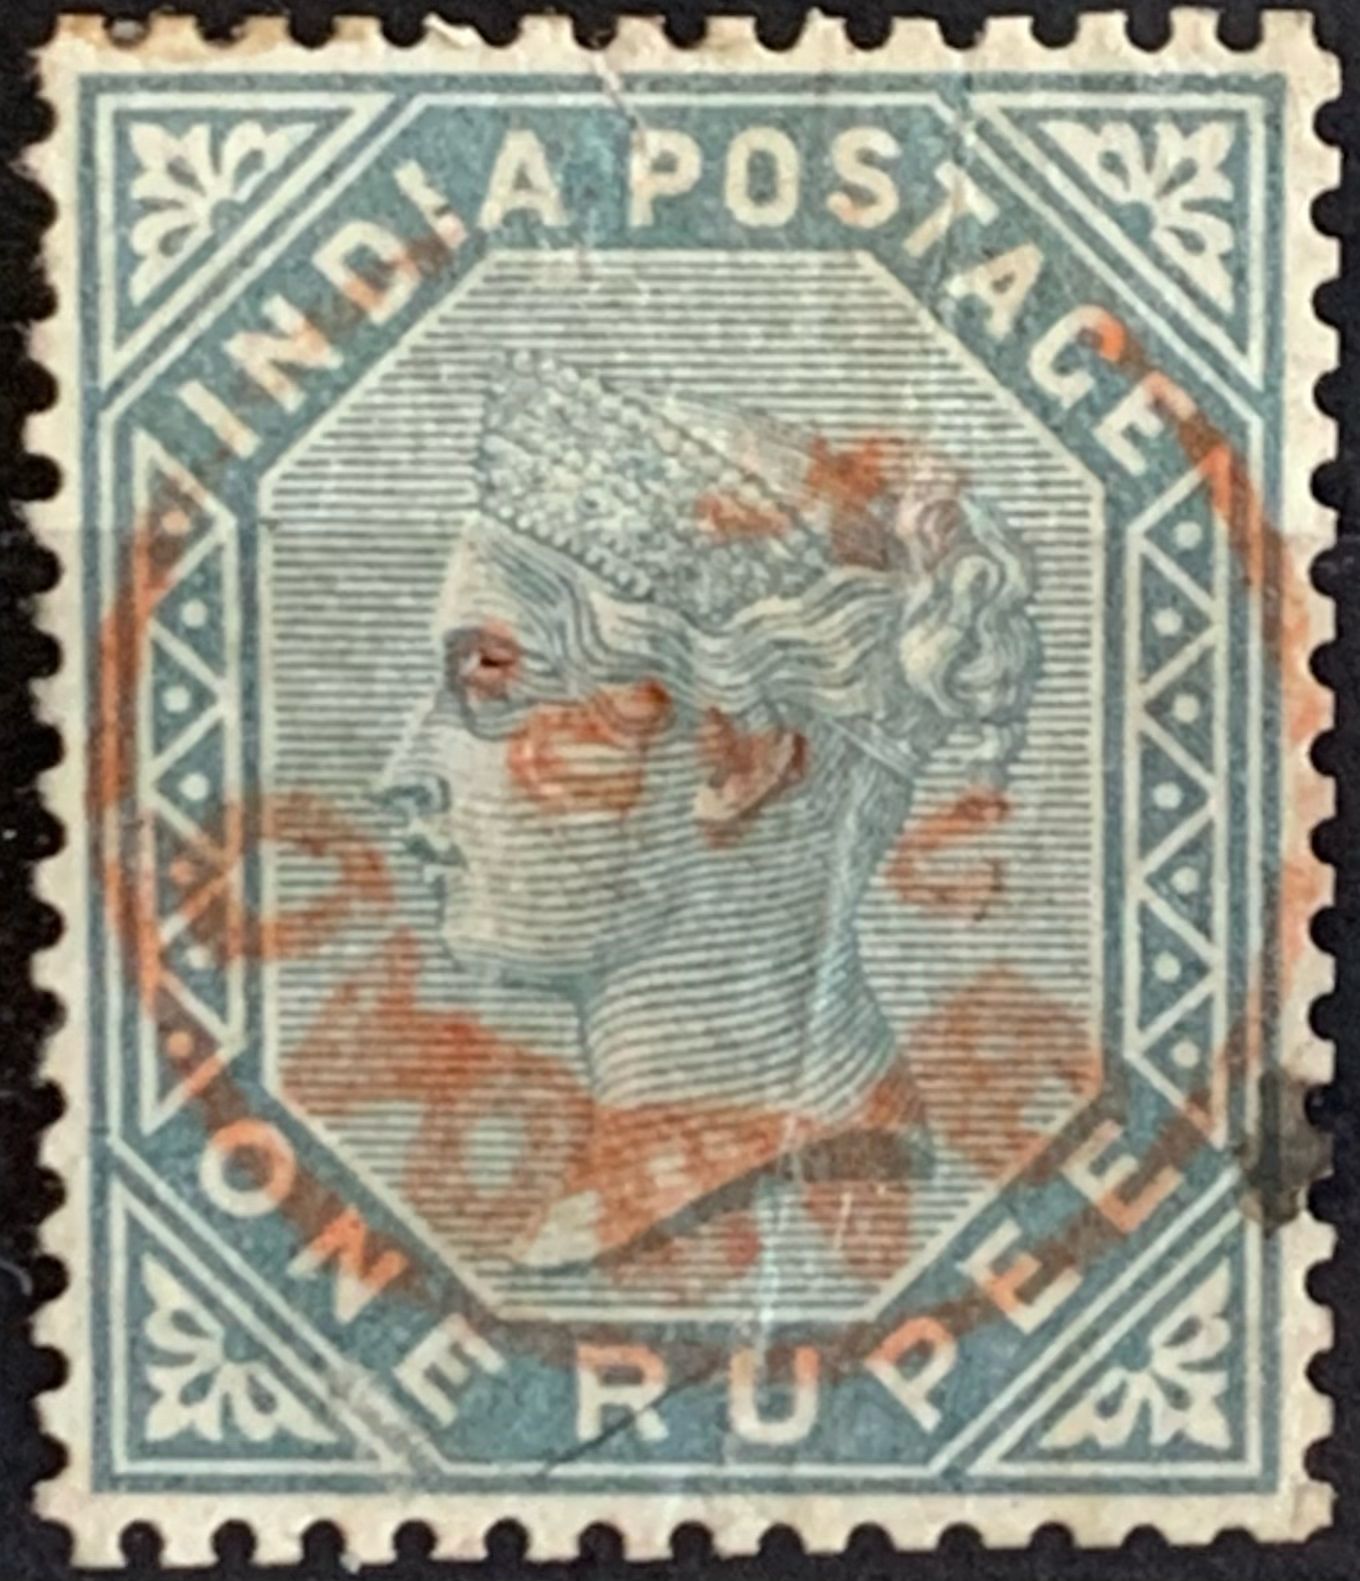 India 1882 QV 1re Used Abroad in BAGDAD Fine Cancelled